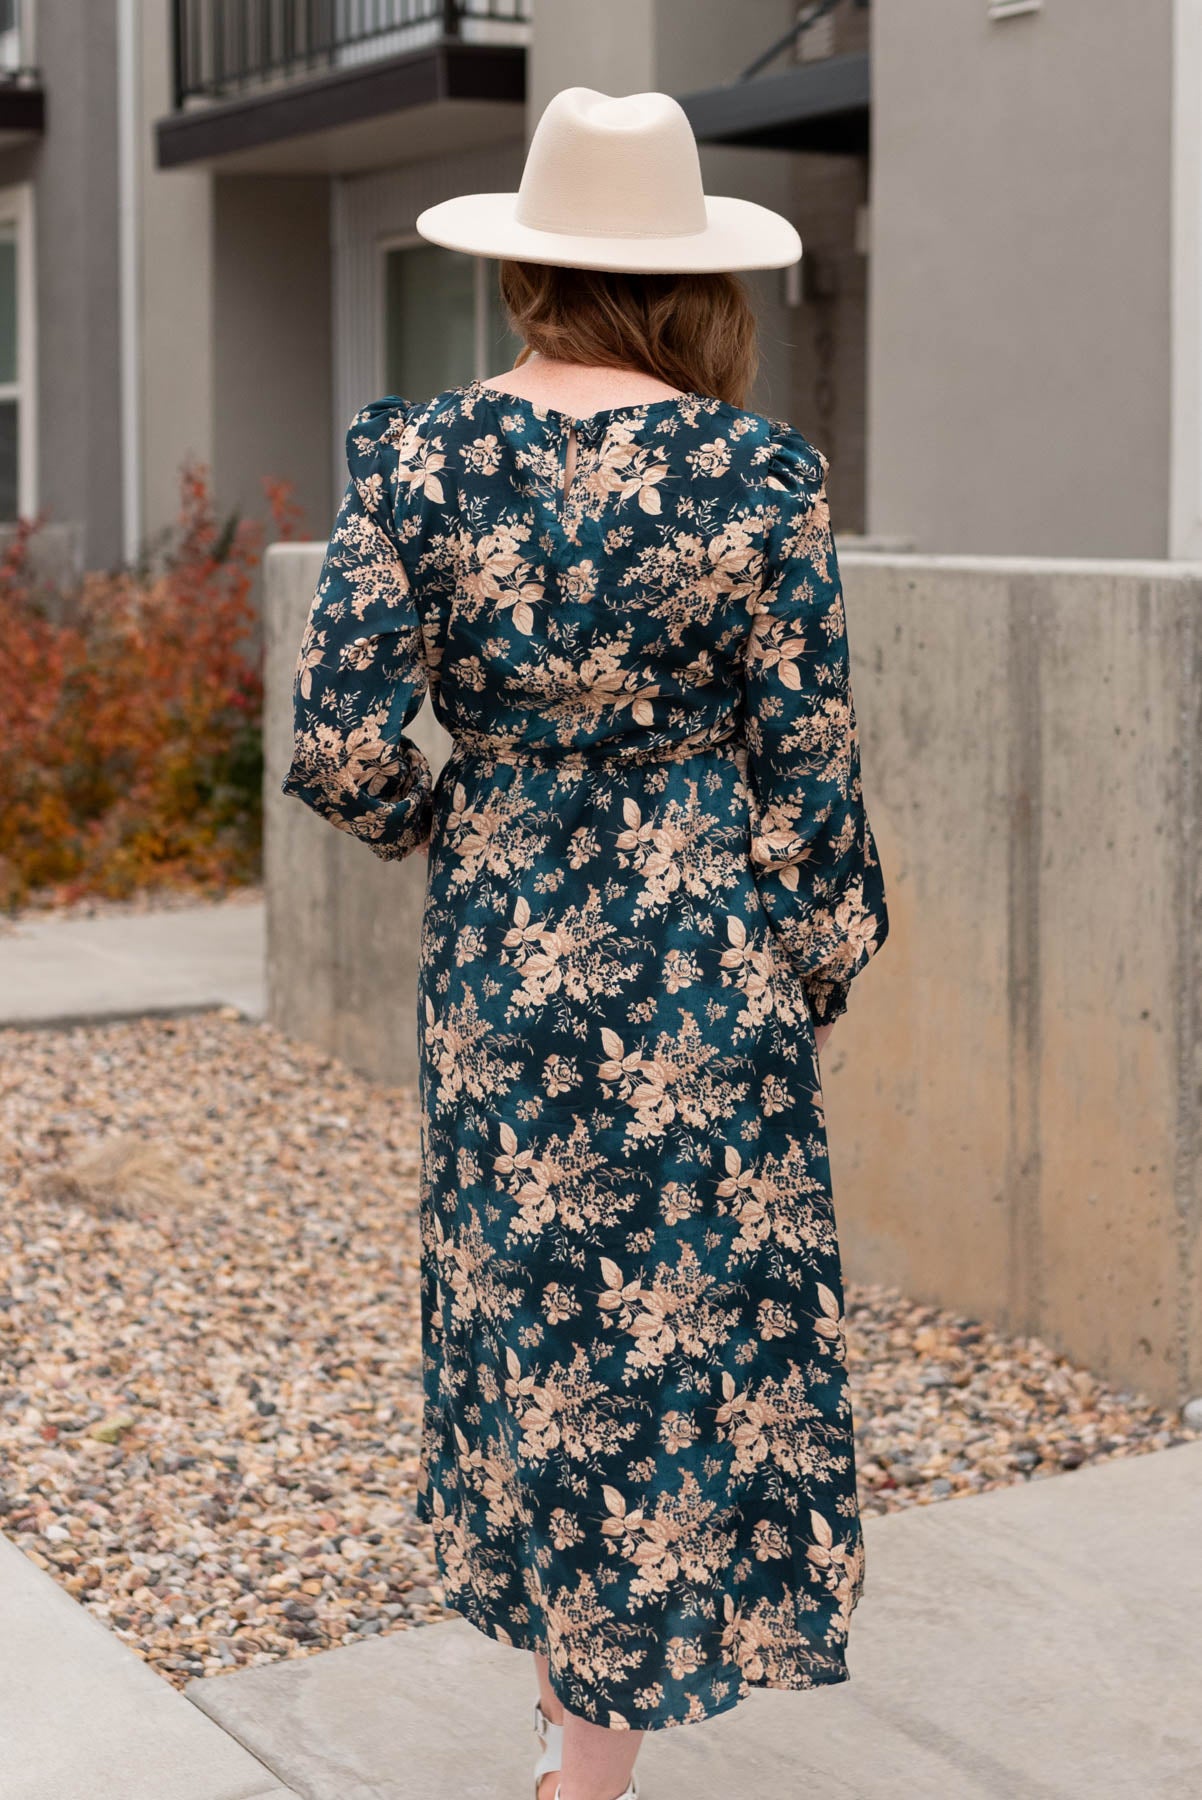 Back view of the teal satin floral dress